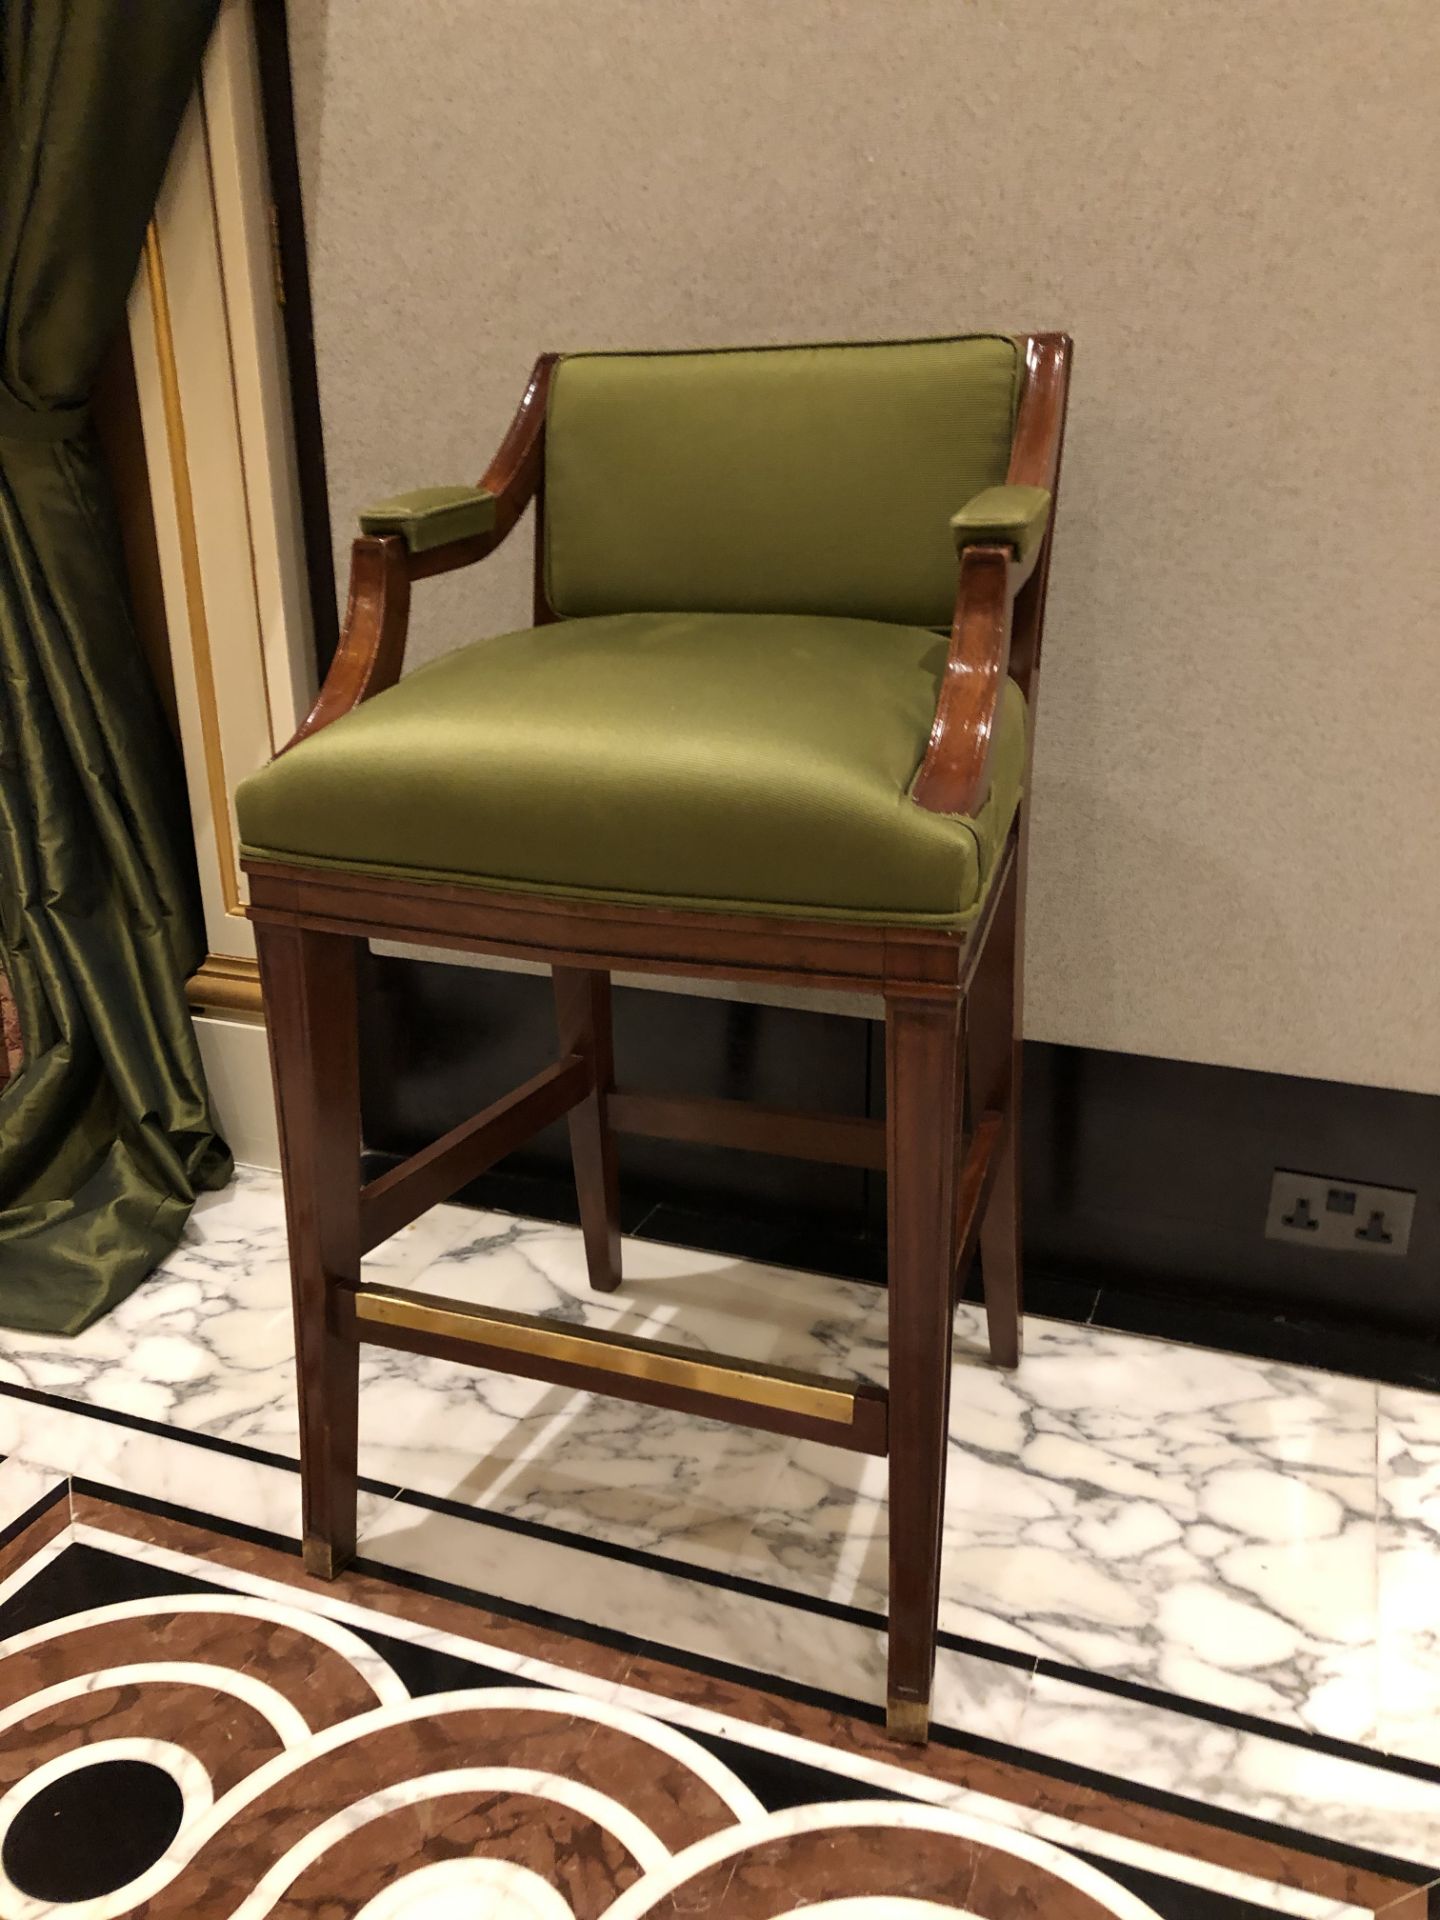 Neoclassic style mahogany tall bar stool, with a Lelievre Paris Olive Green upholstered padded